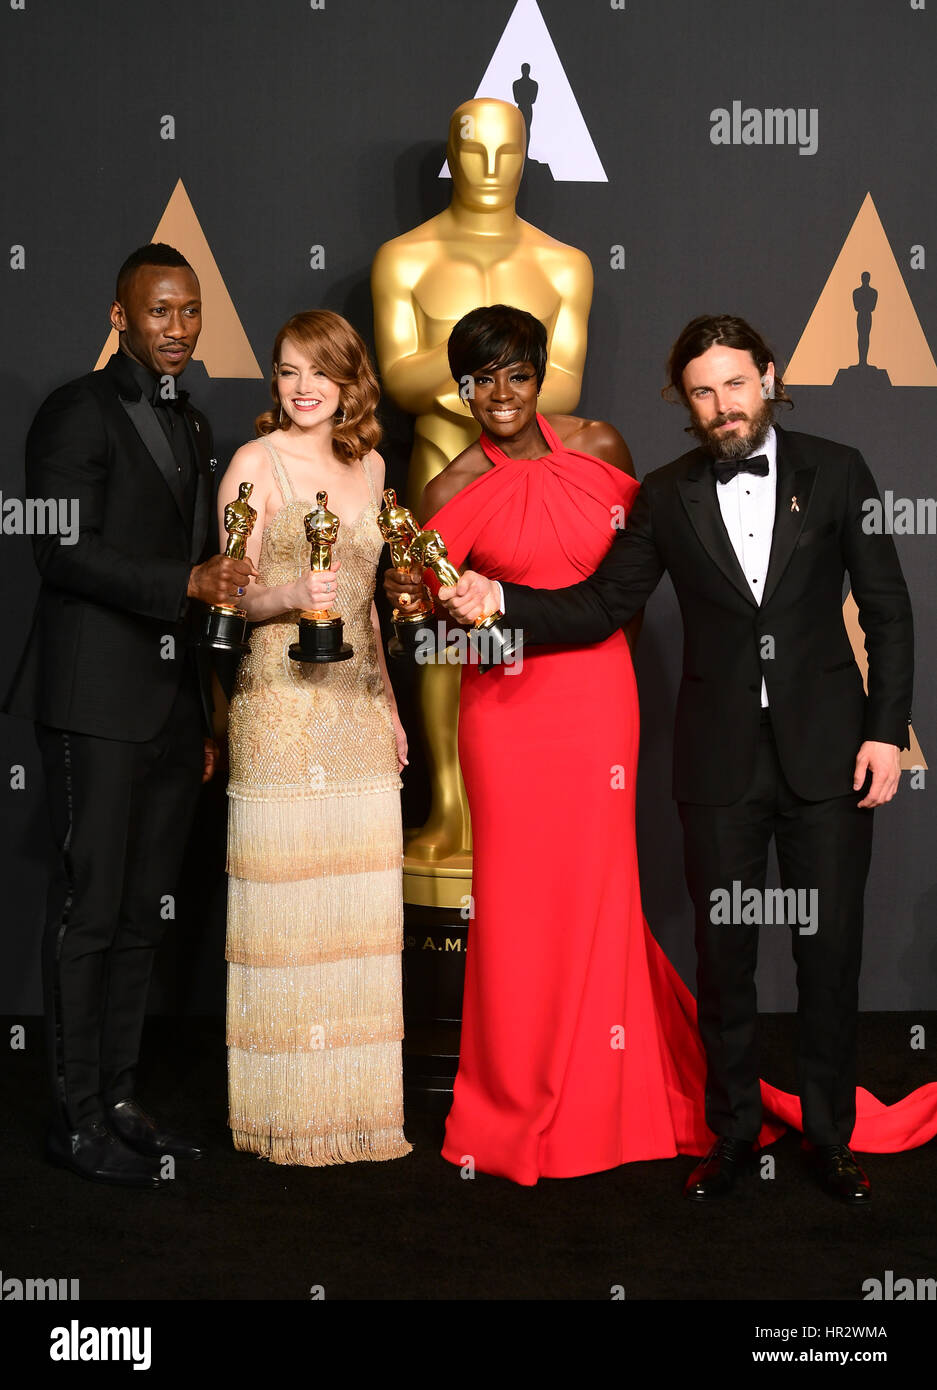 (left to right) Mahershala Ali with the award for Best Supporting Actor, Emma Stone with the award for Best Actress, Viola Davis with the award for Best Supporting Actress and Casey Affleck with the award for Best Actor in the press room at the 89th Academy Awards held at the Dolby Theatre in Hollywood, Los Angeles, USA. Stock Photo